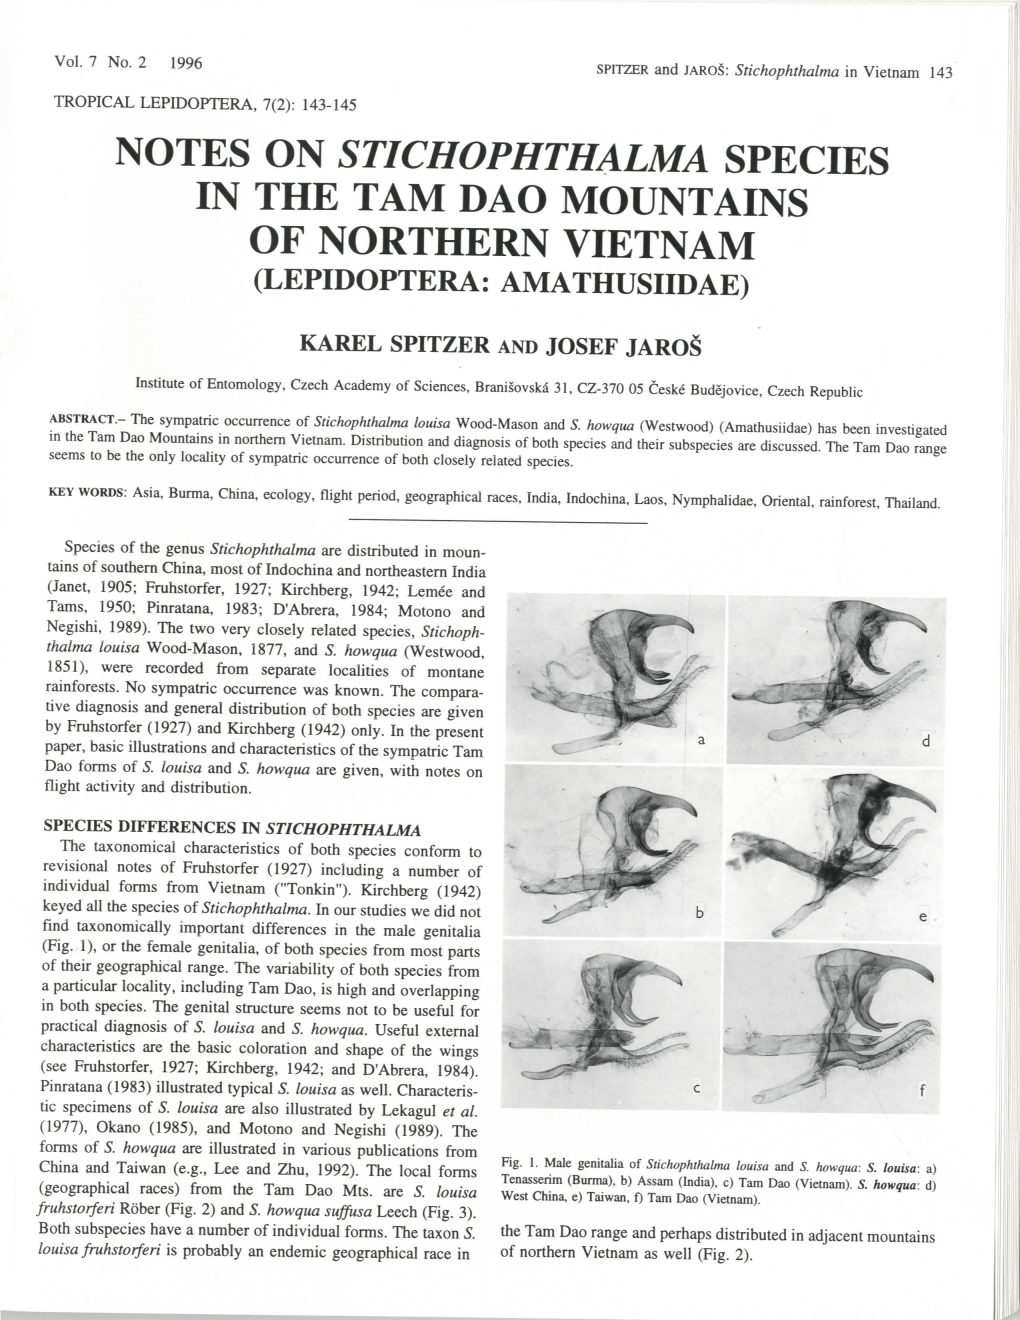 Notes on Stichophthalma Species in the Tam Dao Mountains of Northern Vietnam (Lepidoptera: Amathusiidae)